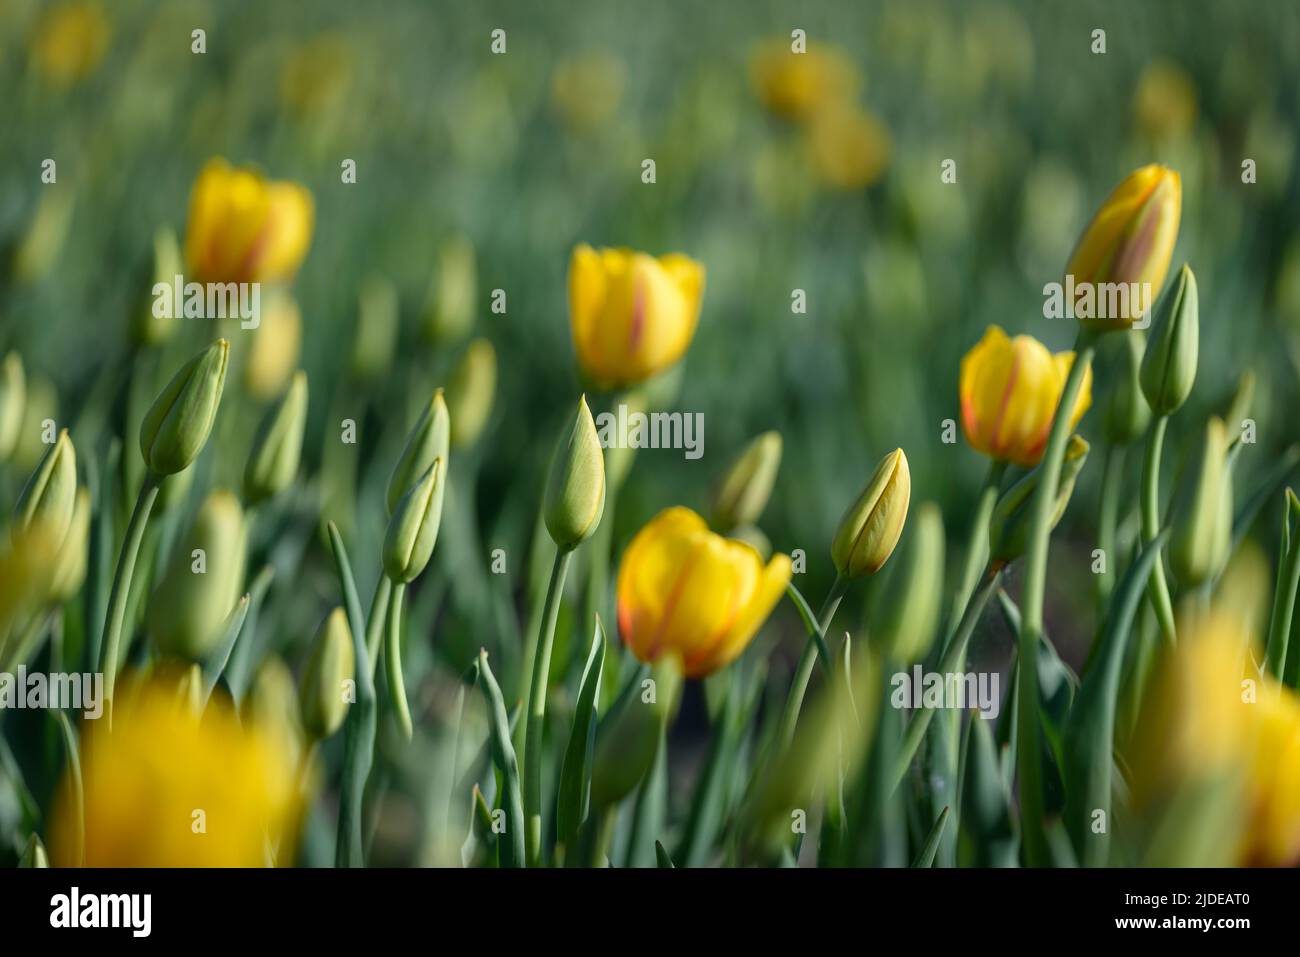 View of yellow tulips some blossomed some coming to bloom on blurred background. Stock Photo